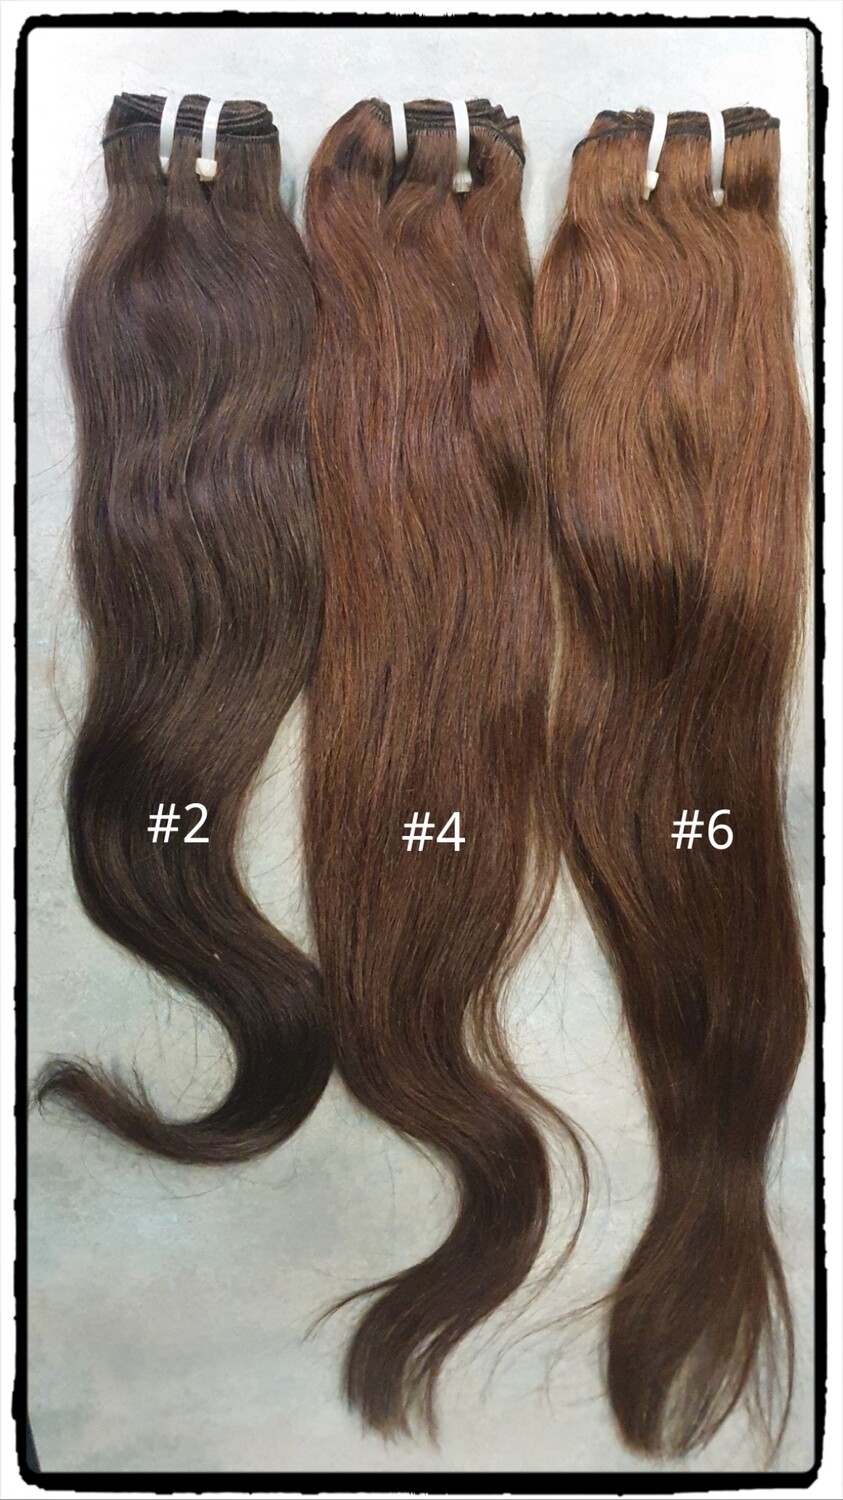 Extensions tissage Indiennes lisses 100% vierges & remy #2 19